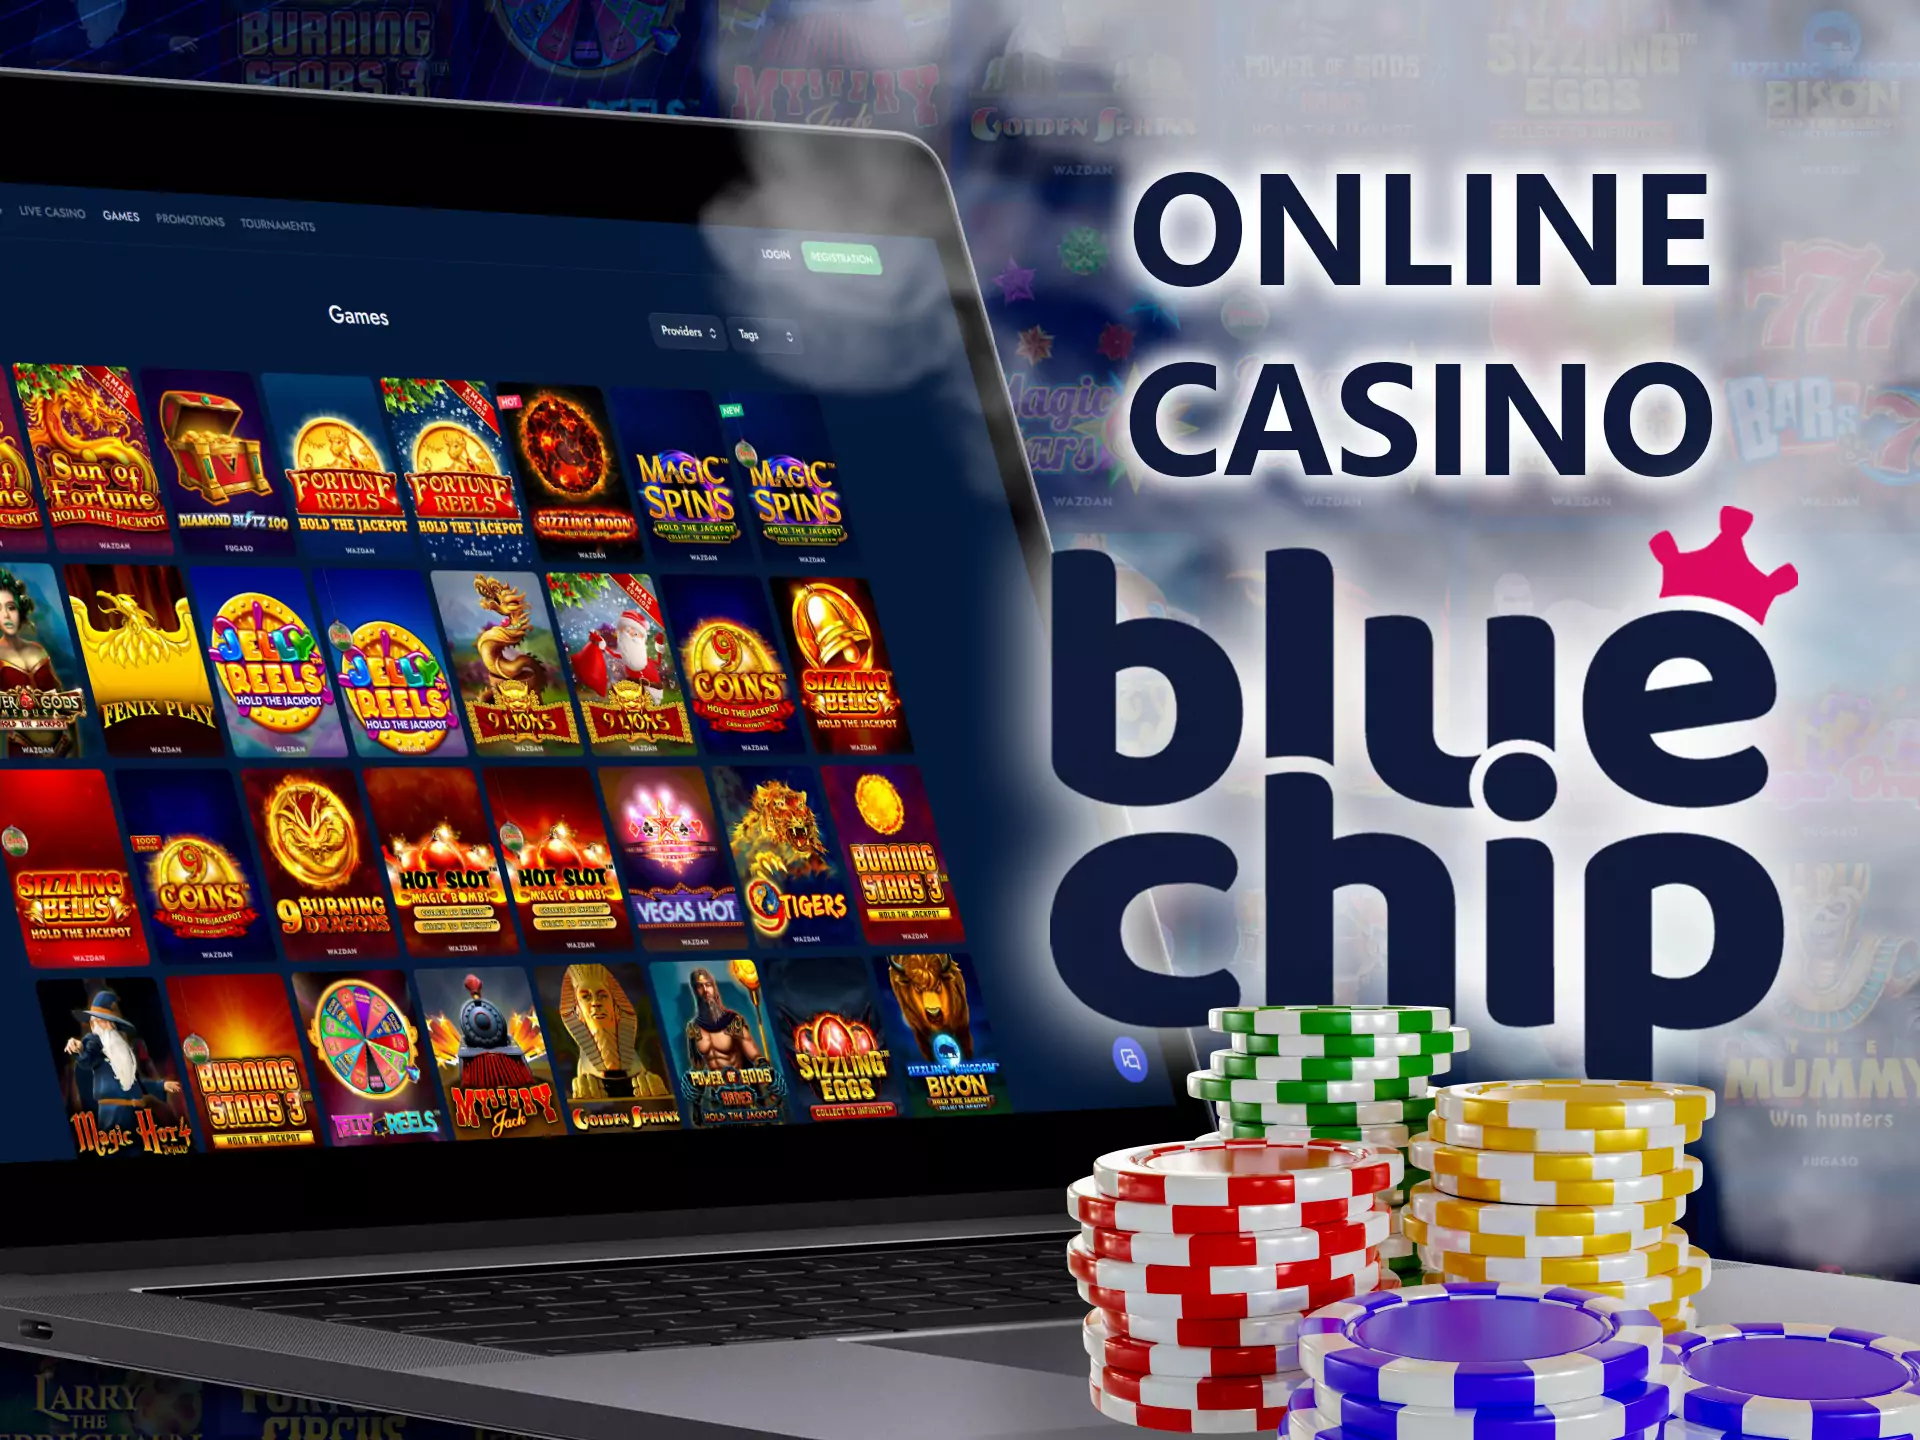 On Bluechip, you can also play casino games online and with real dealers.